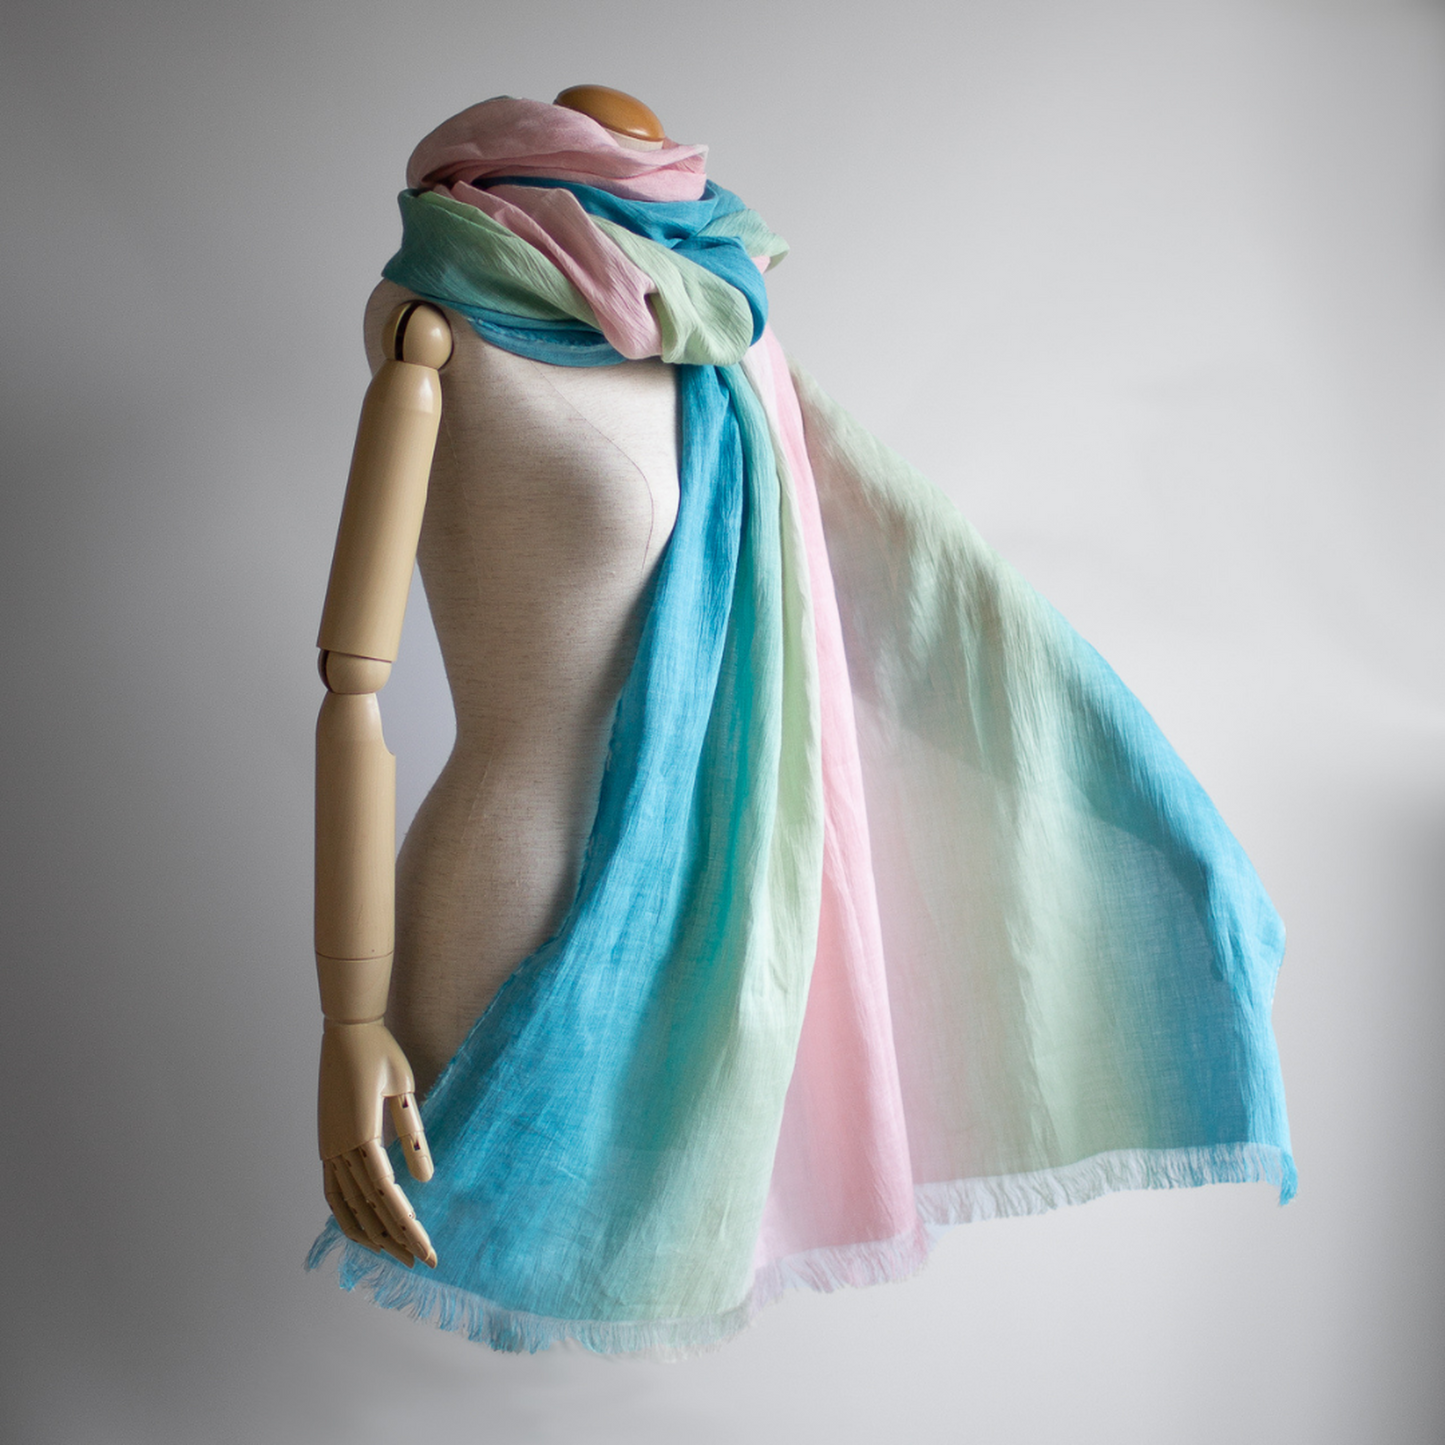 Hand-rolled Linen Yoryu Gradation Primavera Large Scarf Omi Chijimi Hand-dyed Long Scarf -SG01